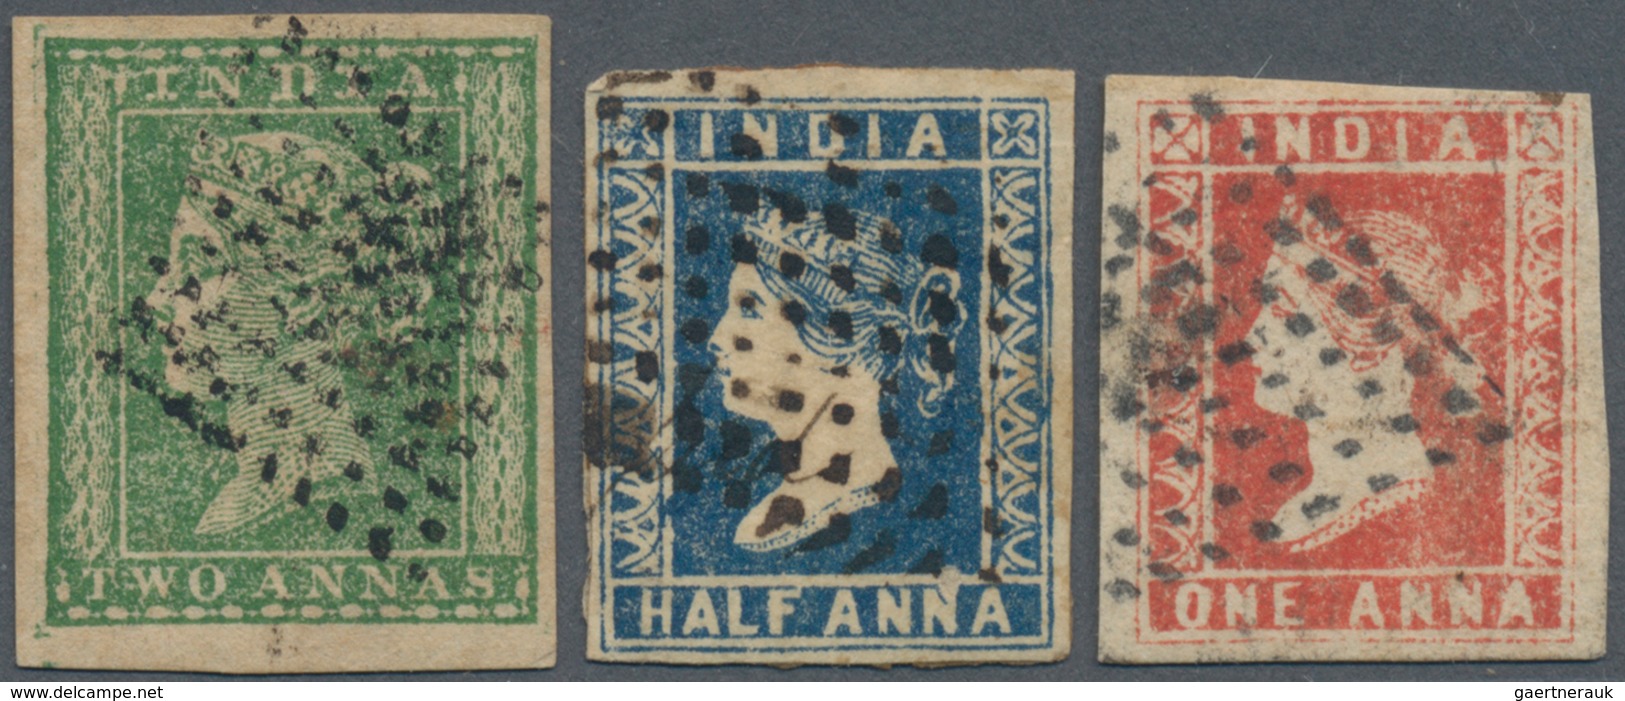 Indien: 1854/1855, Lithographed Issue, ½a. Blue, 1a. Red And 2a. Green, Three Used Stamps. - 1854 Britse Indische Compagnie